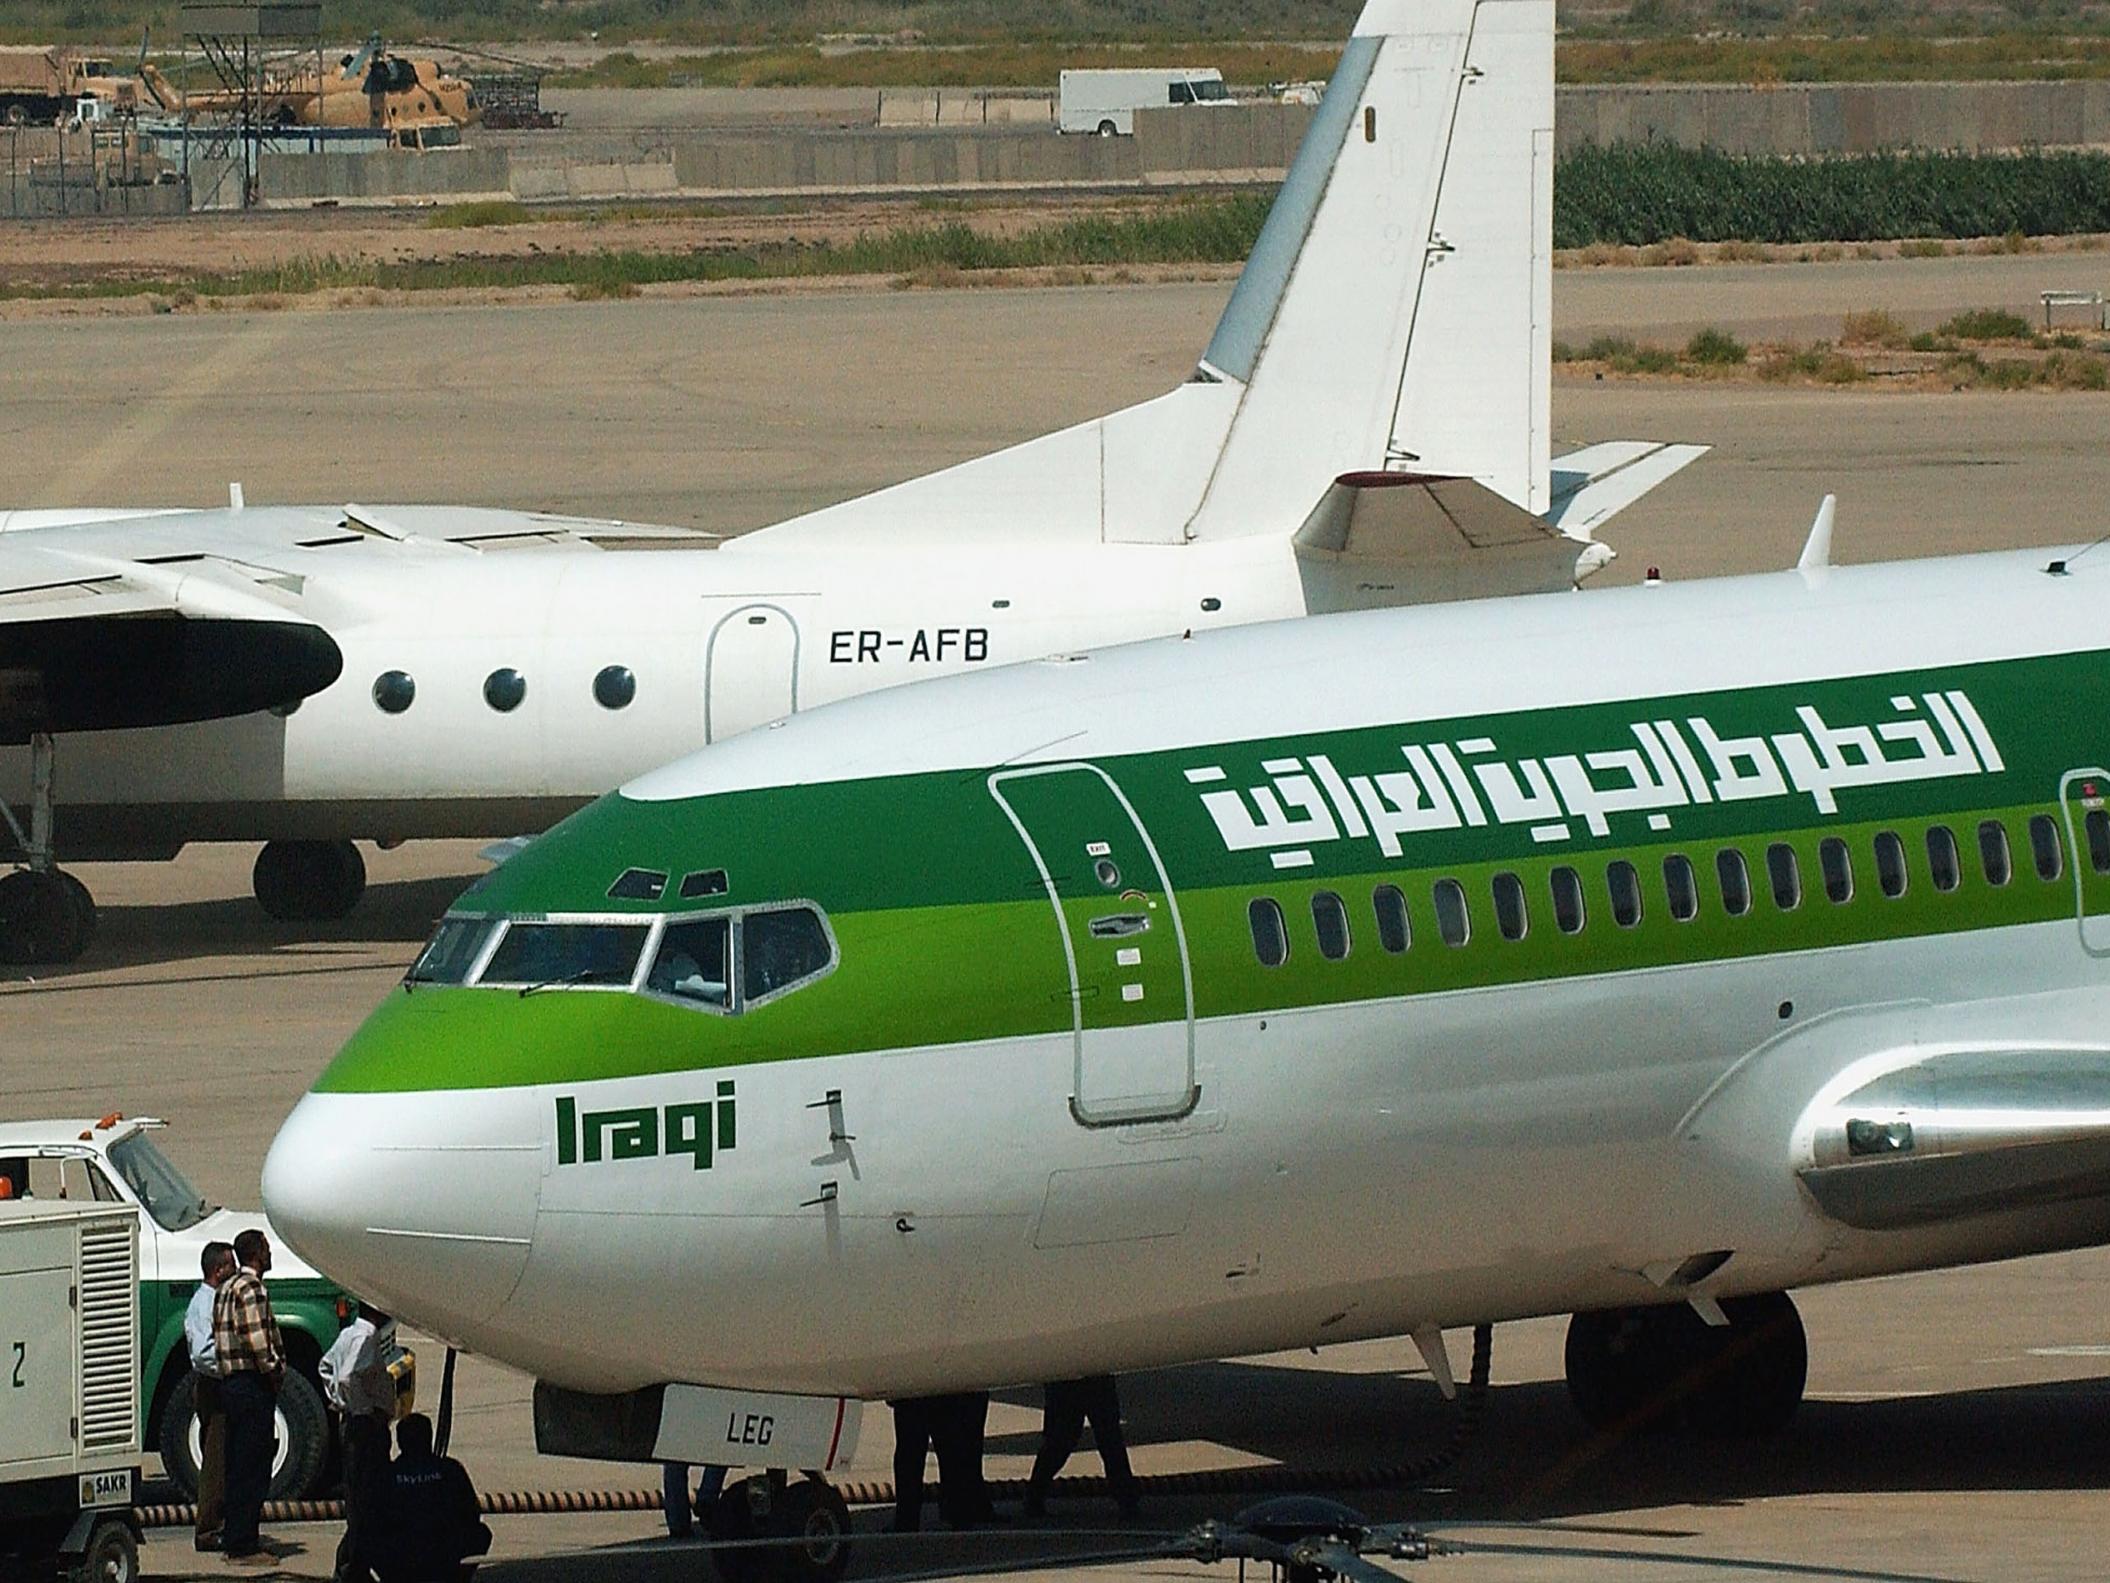 Iraqi Airways suspends pilots for fighting in cockpit at 37,000 ft